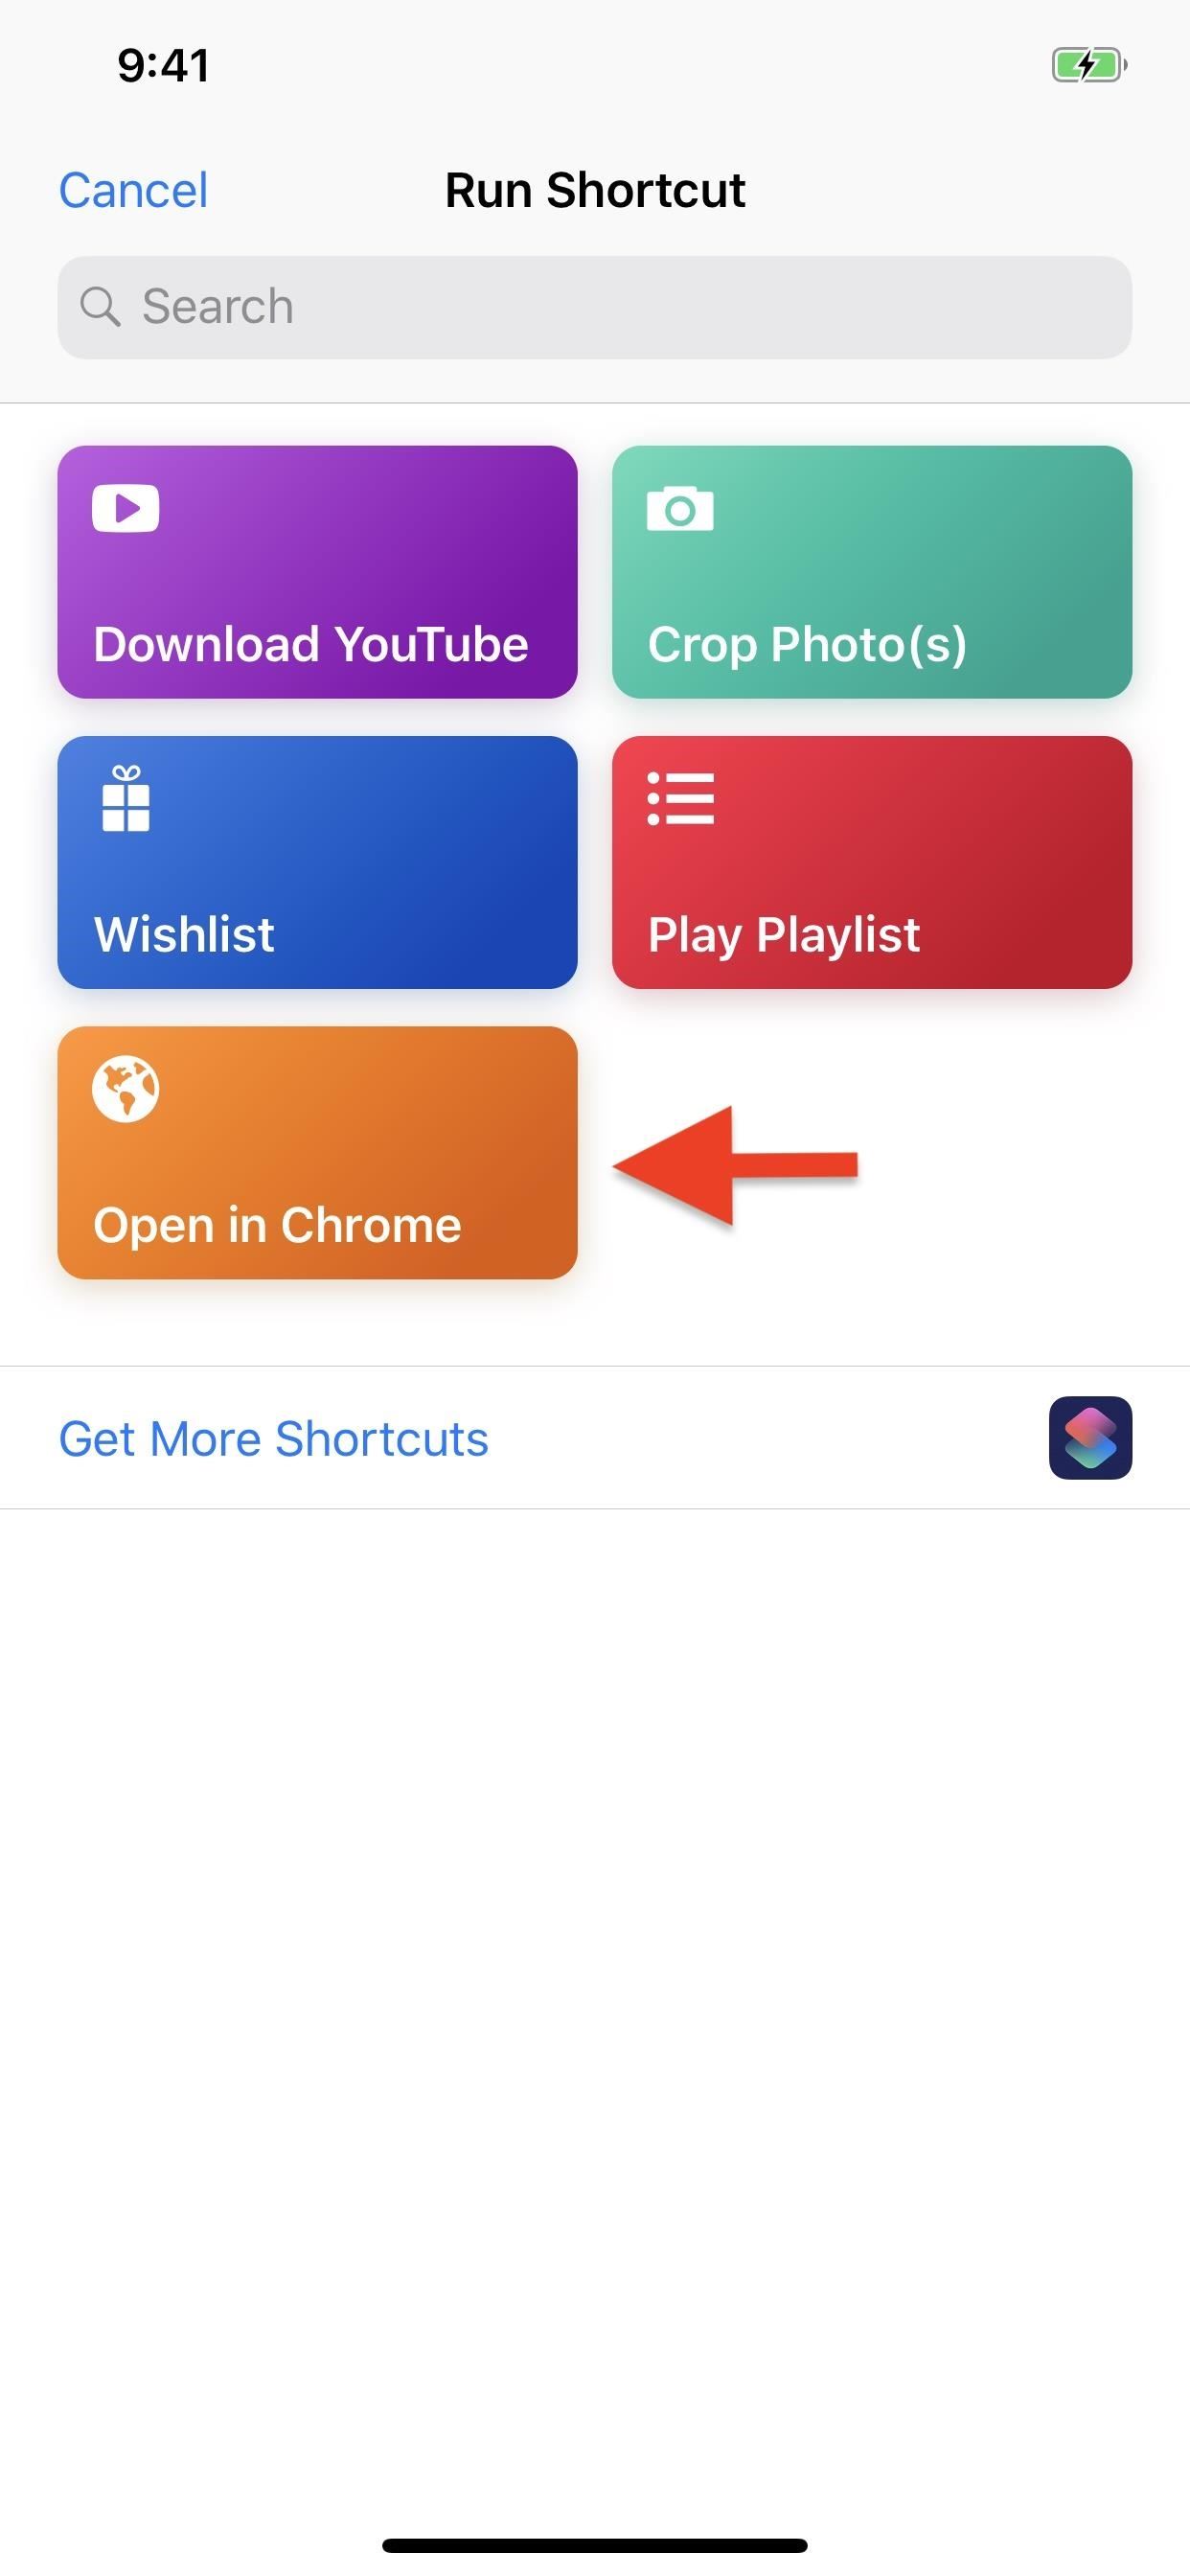 How to Open Links in Chrome Instead of Safari on Your iPhone Using the Shortcuts App